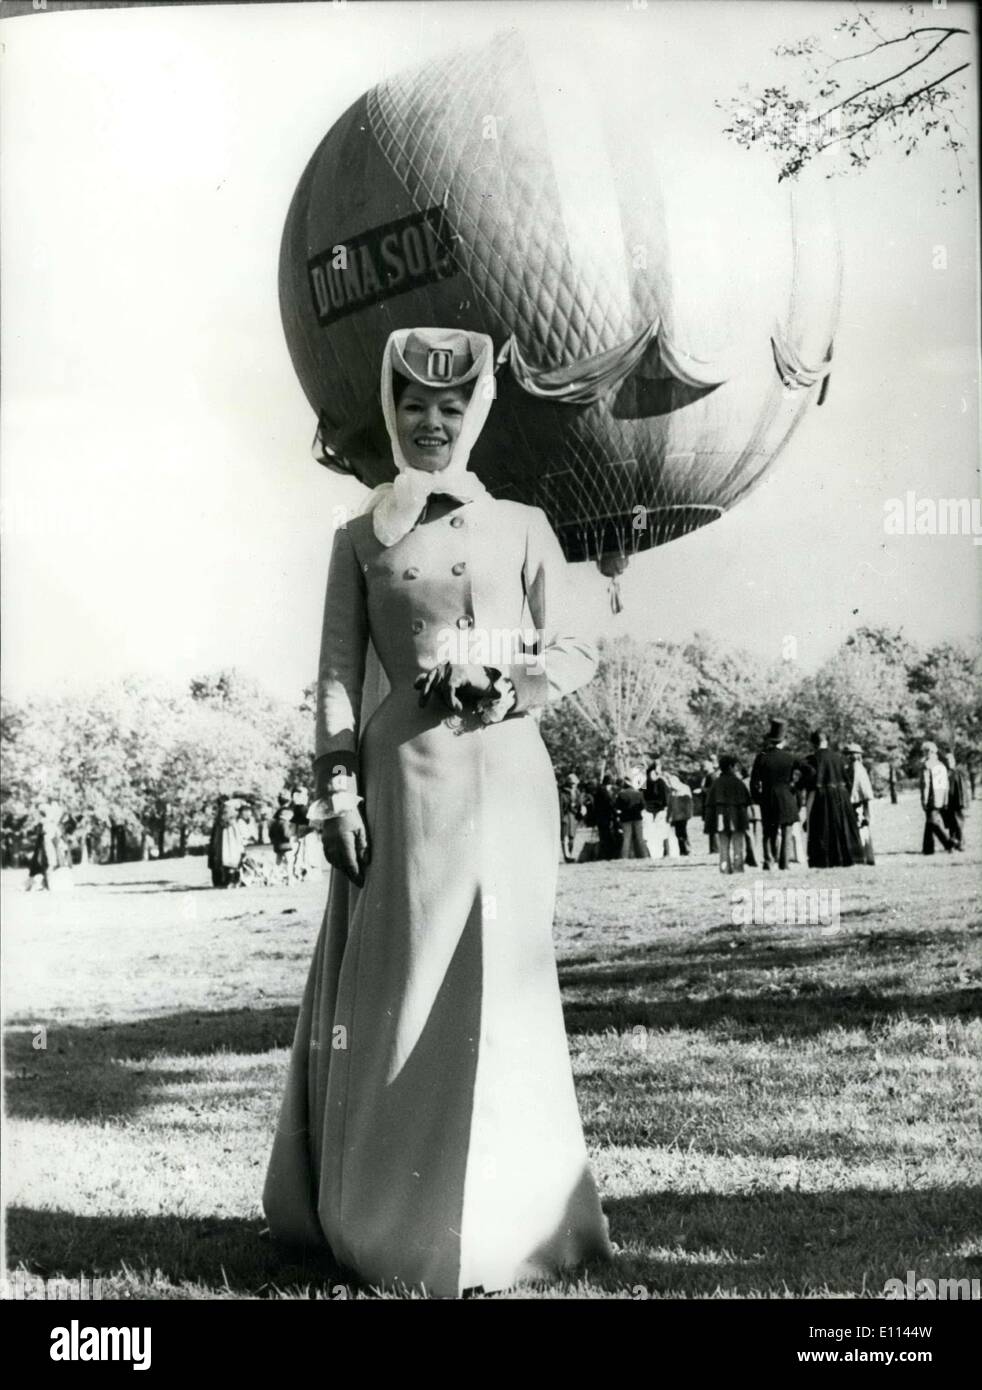 Oct. 17, 1975 - Sarah goes up in a balloon; Glenda Jackson, portraying the great actress Sarah Bernhardt (1844-1923) in the Lavish Reader's Digest film ''Sarah'', now in production in England, took off in a balloon near London last weekend. In the film the scene takes place in Paris in the 1870's when Sarah, then a rebellious young actress with the Comedie Francoise, decide to go ballooning in the Beis de Boulogne but was carried off course by strong winds, missed three performances and was fired Stock Photo